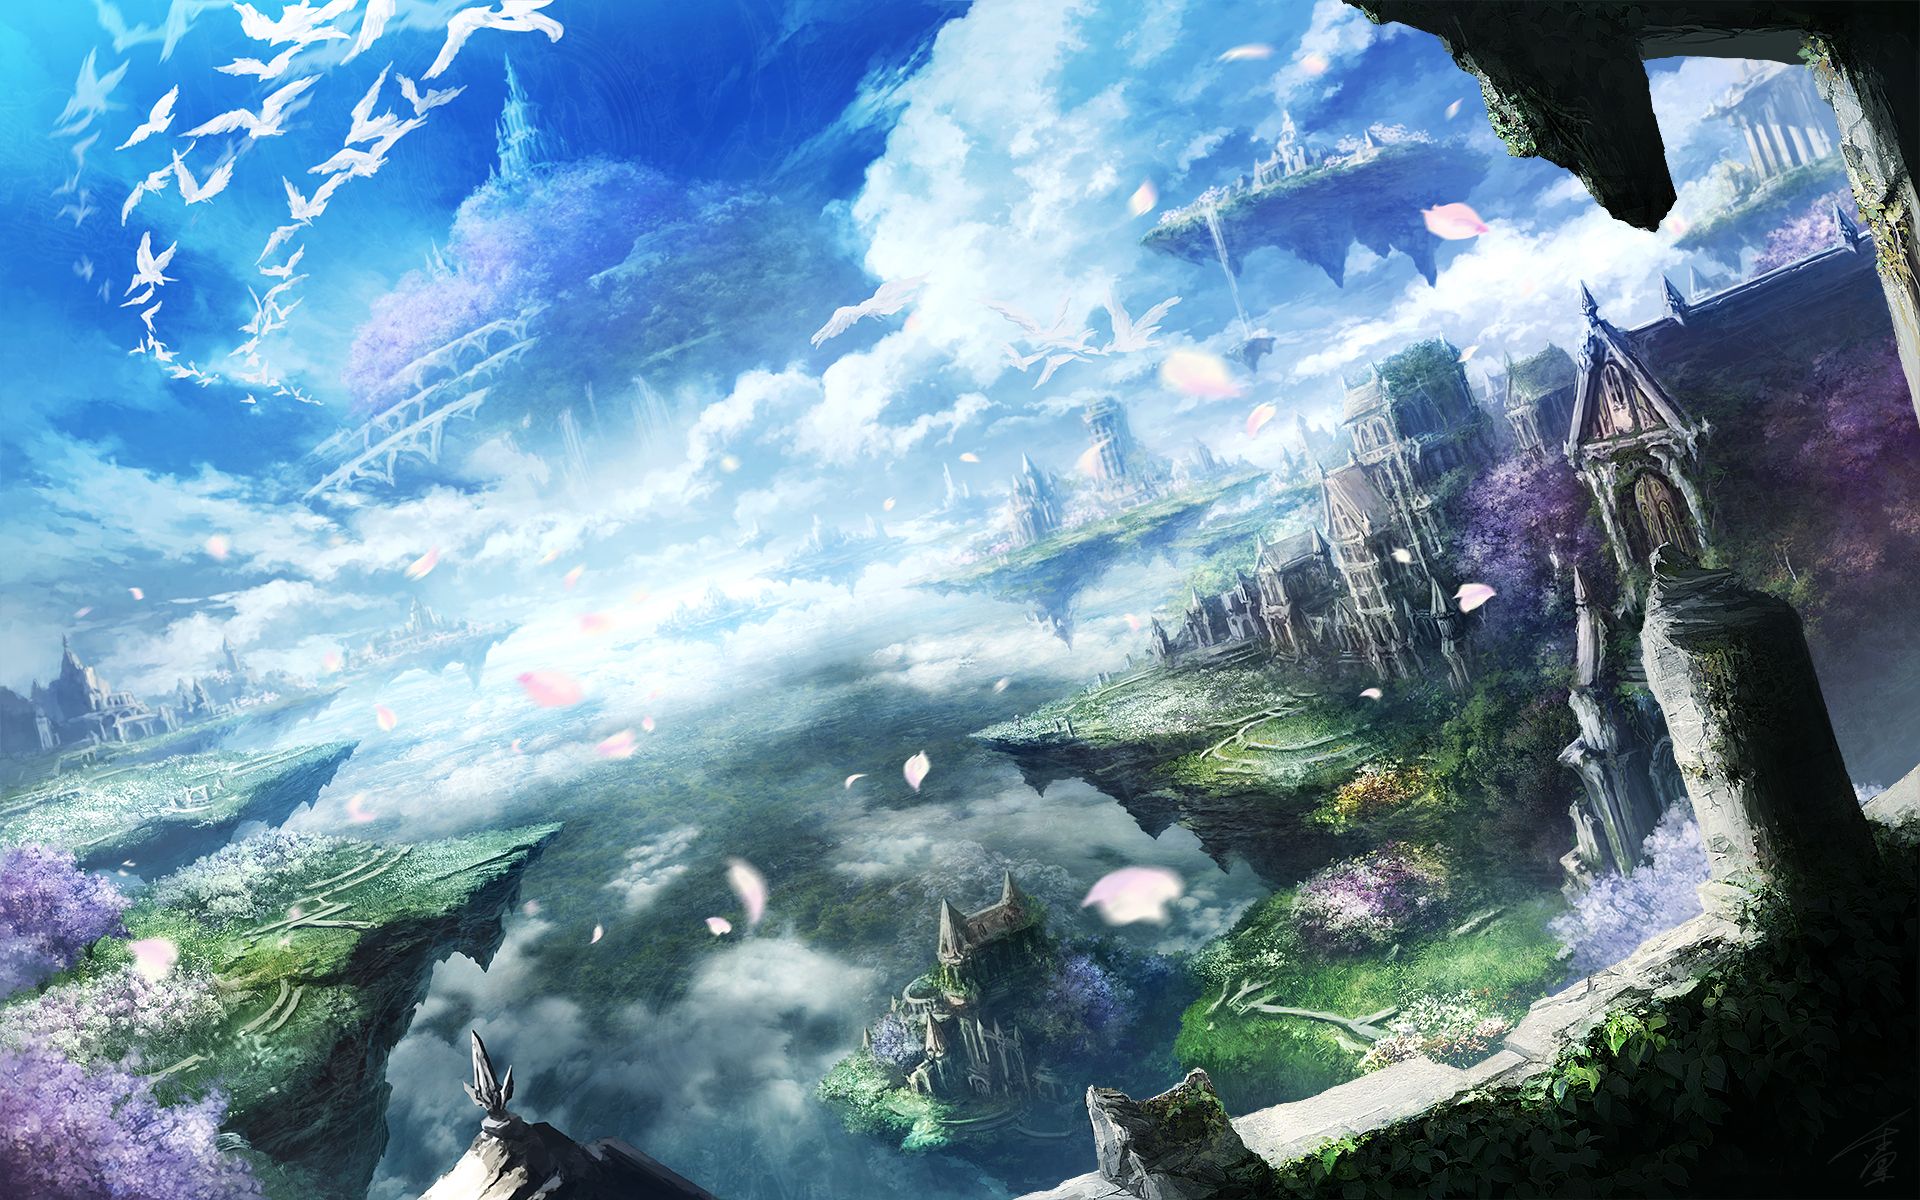 anime landscape wallpaper,action adventure game,sky,pc game,strategy video game,cg artwork